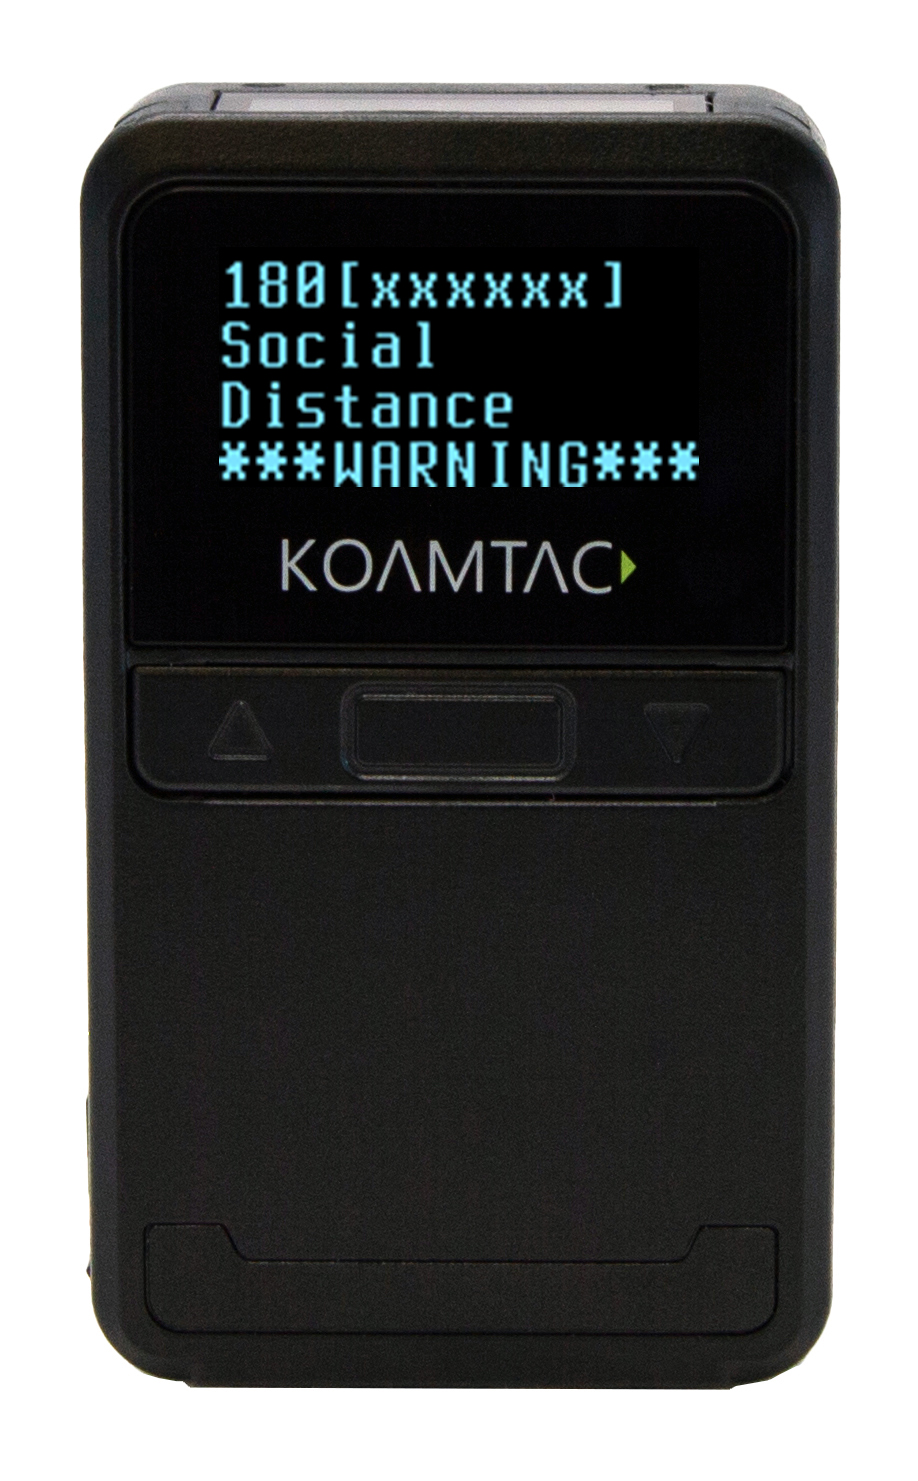 KOAMTAC KDC180 BLE Wearable Barcode Scanner with Social Distance Warning on Screen